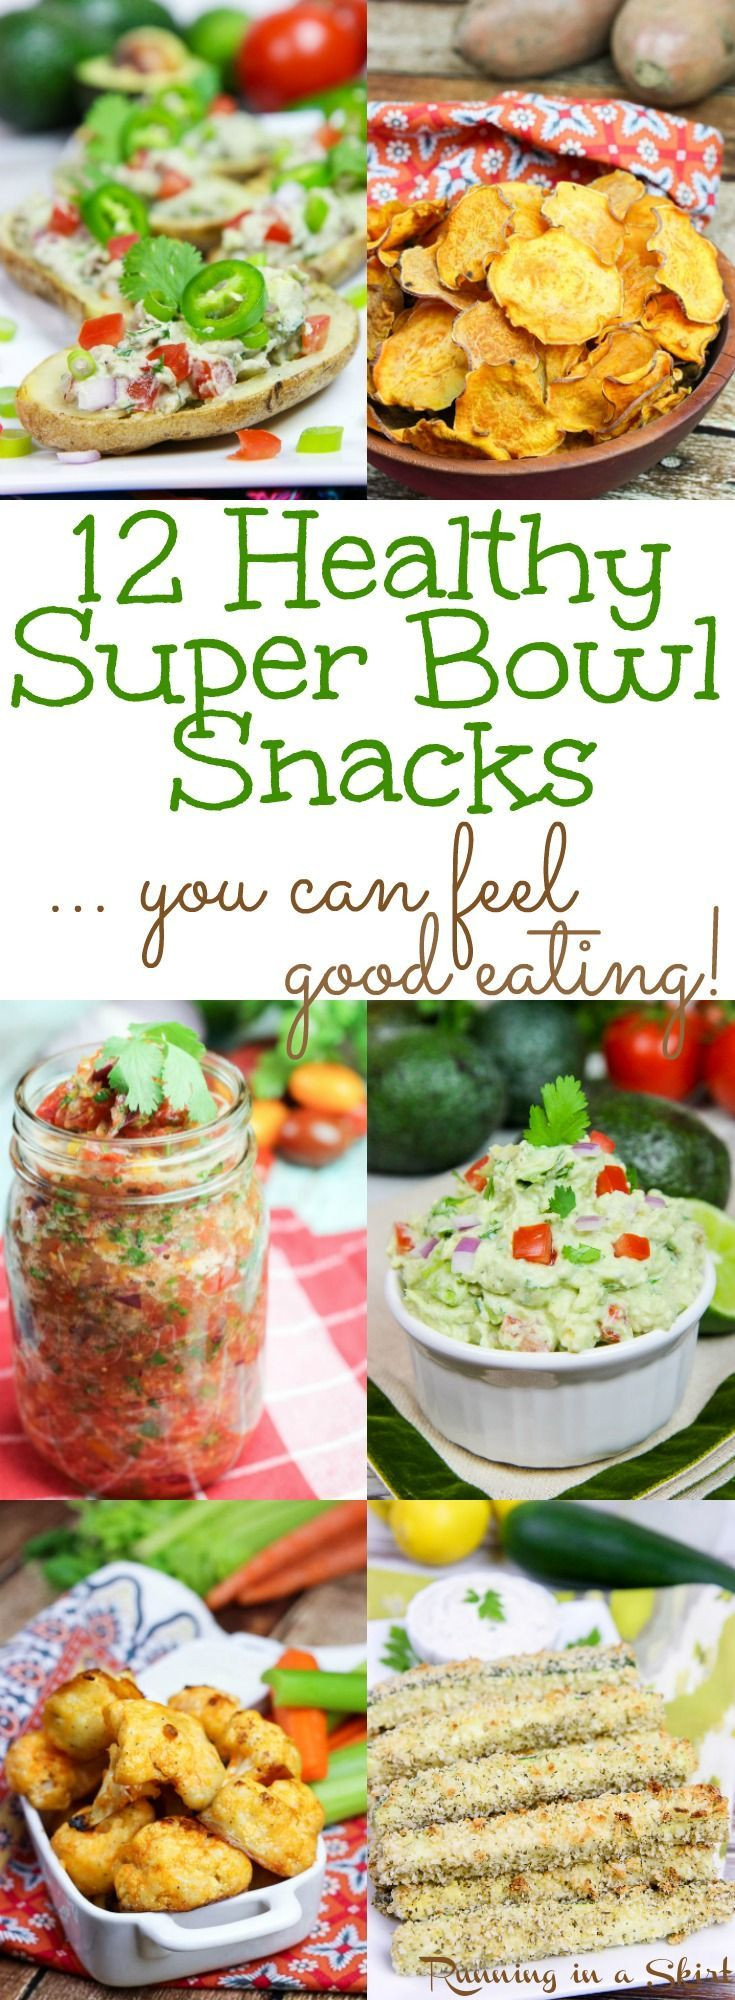 Healthy Super Bowl Snacks
 12 Healthy Super Bowl Snacks These are game day recipes